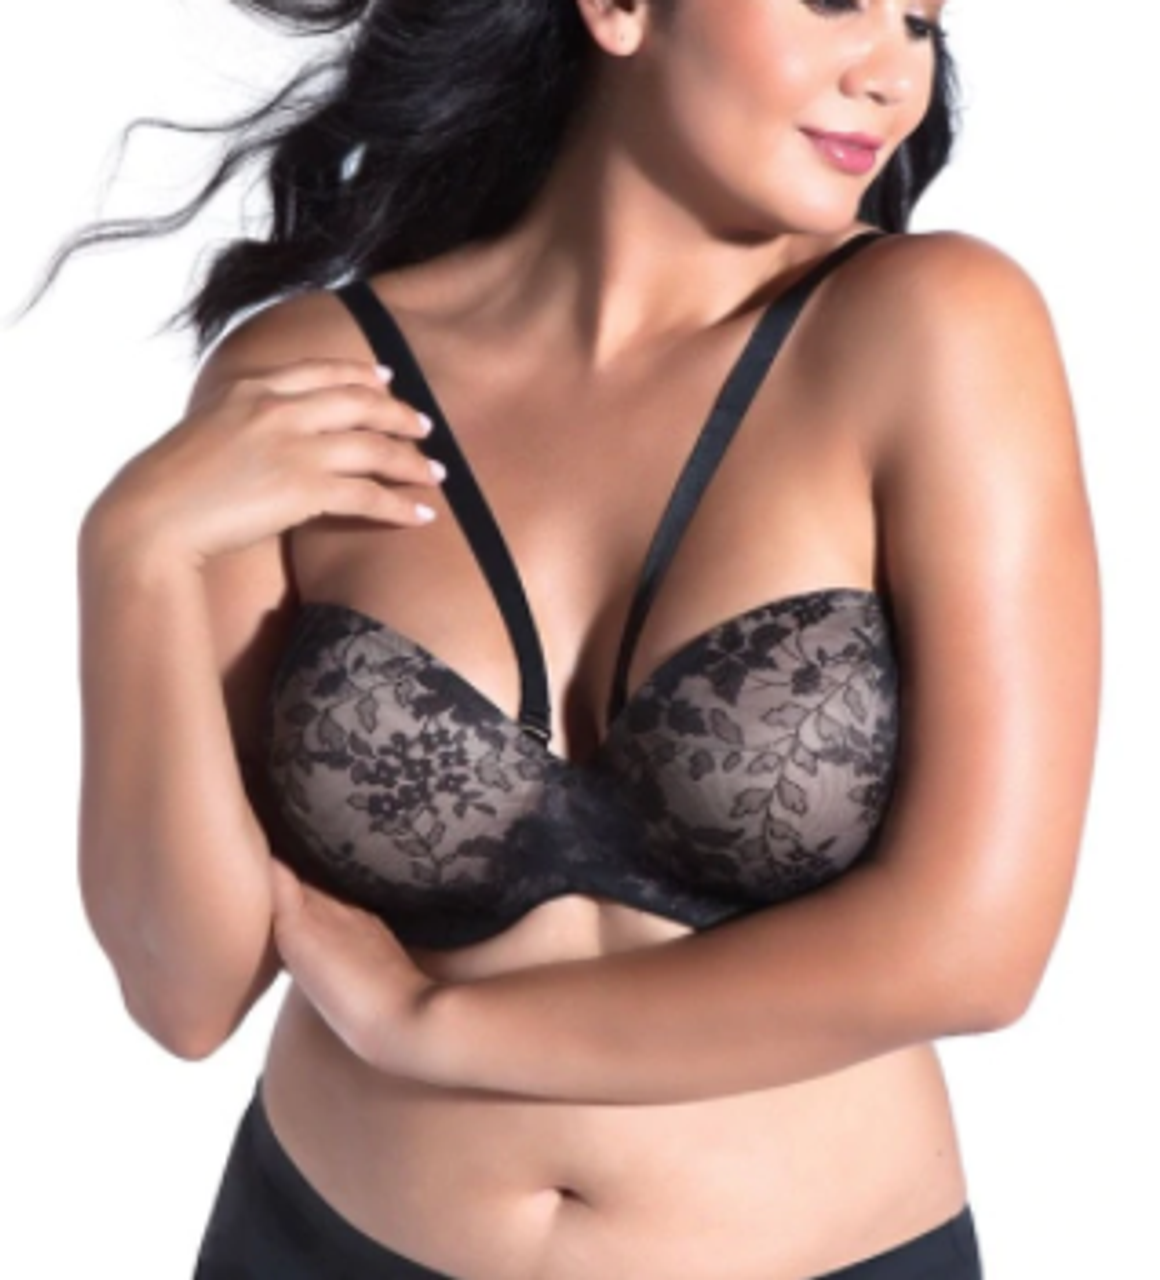 Curvy Couture Strapless Sensation Multi-Way Push-Up Bra in Black - Busted  Bra Shop